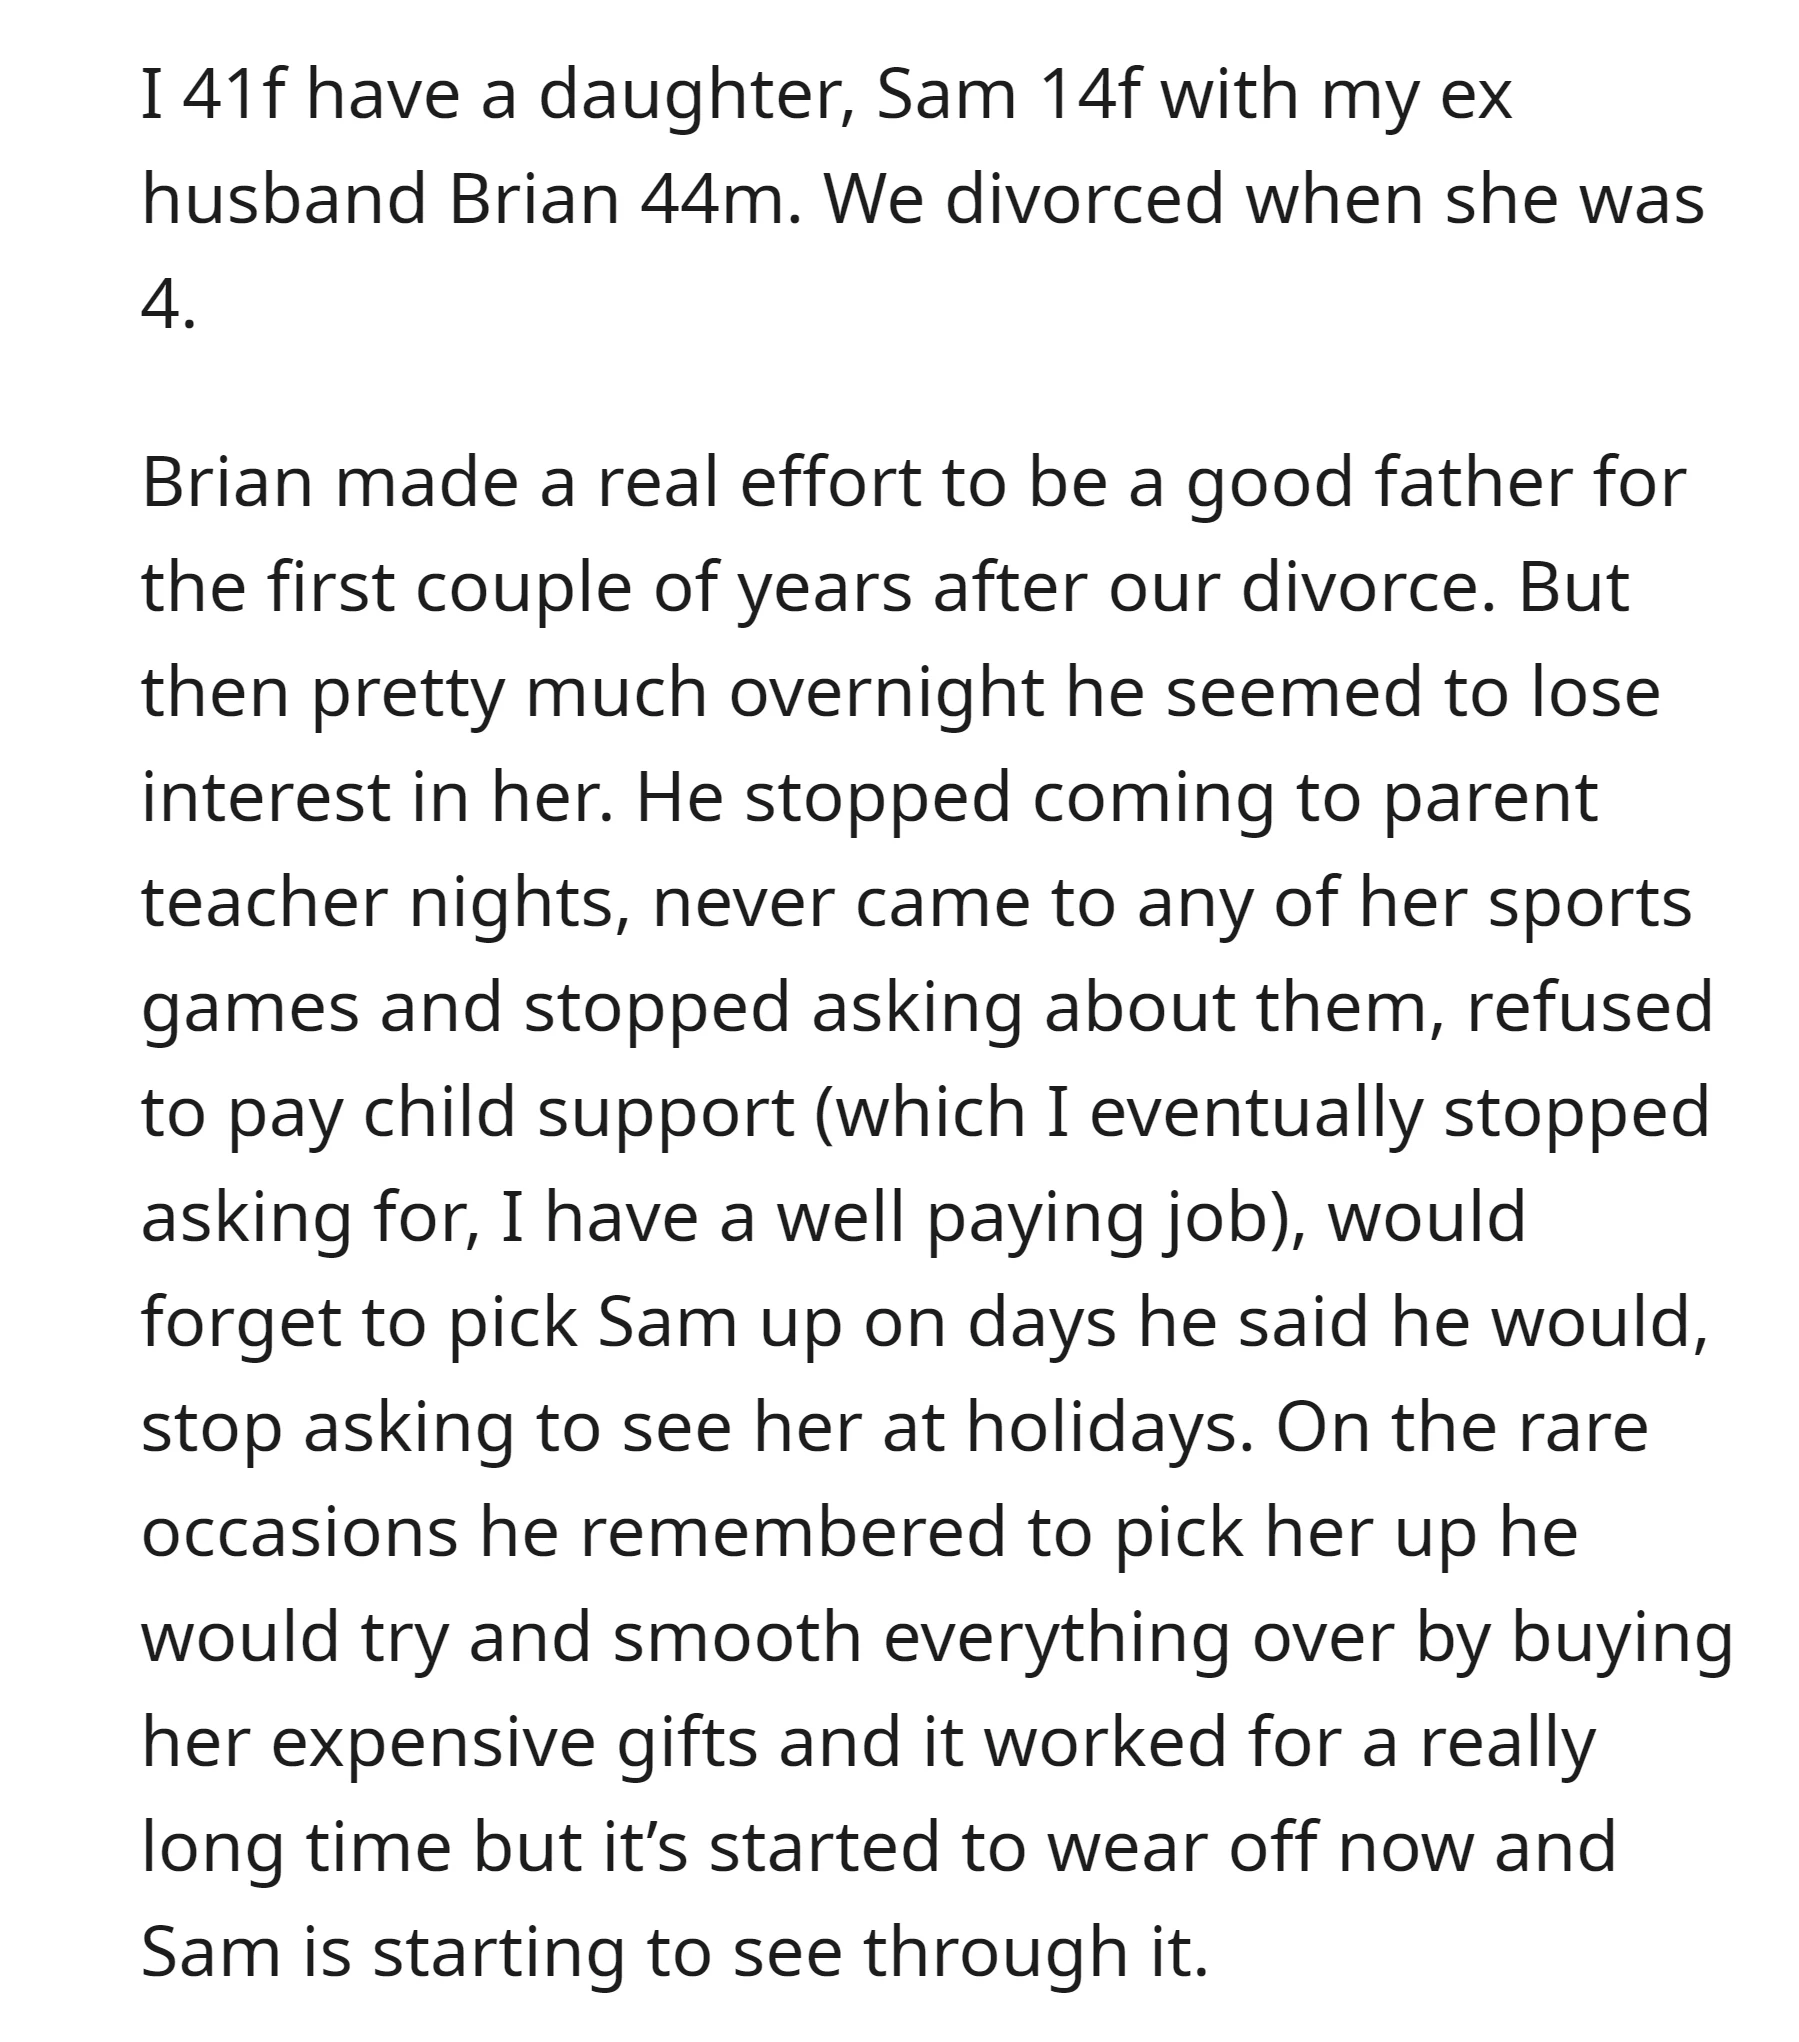 After their divorce, Brian initially tried to be a good father to their daughter